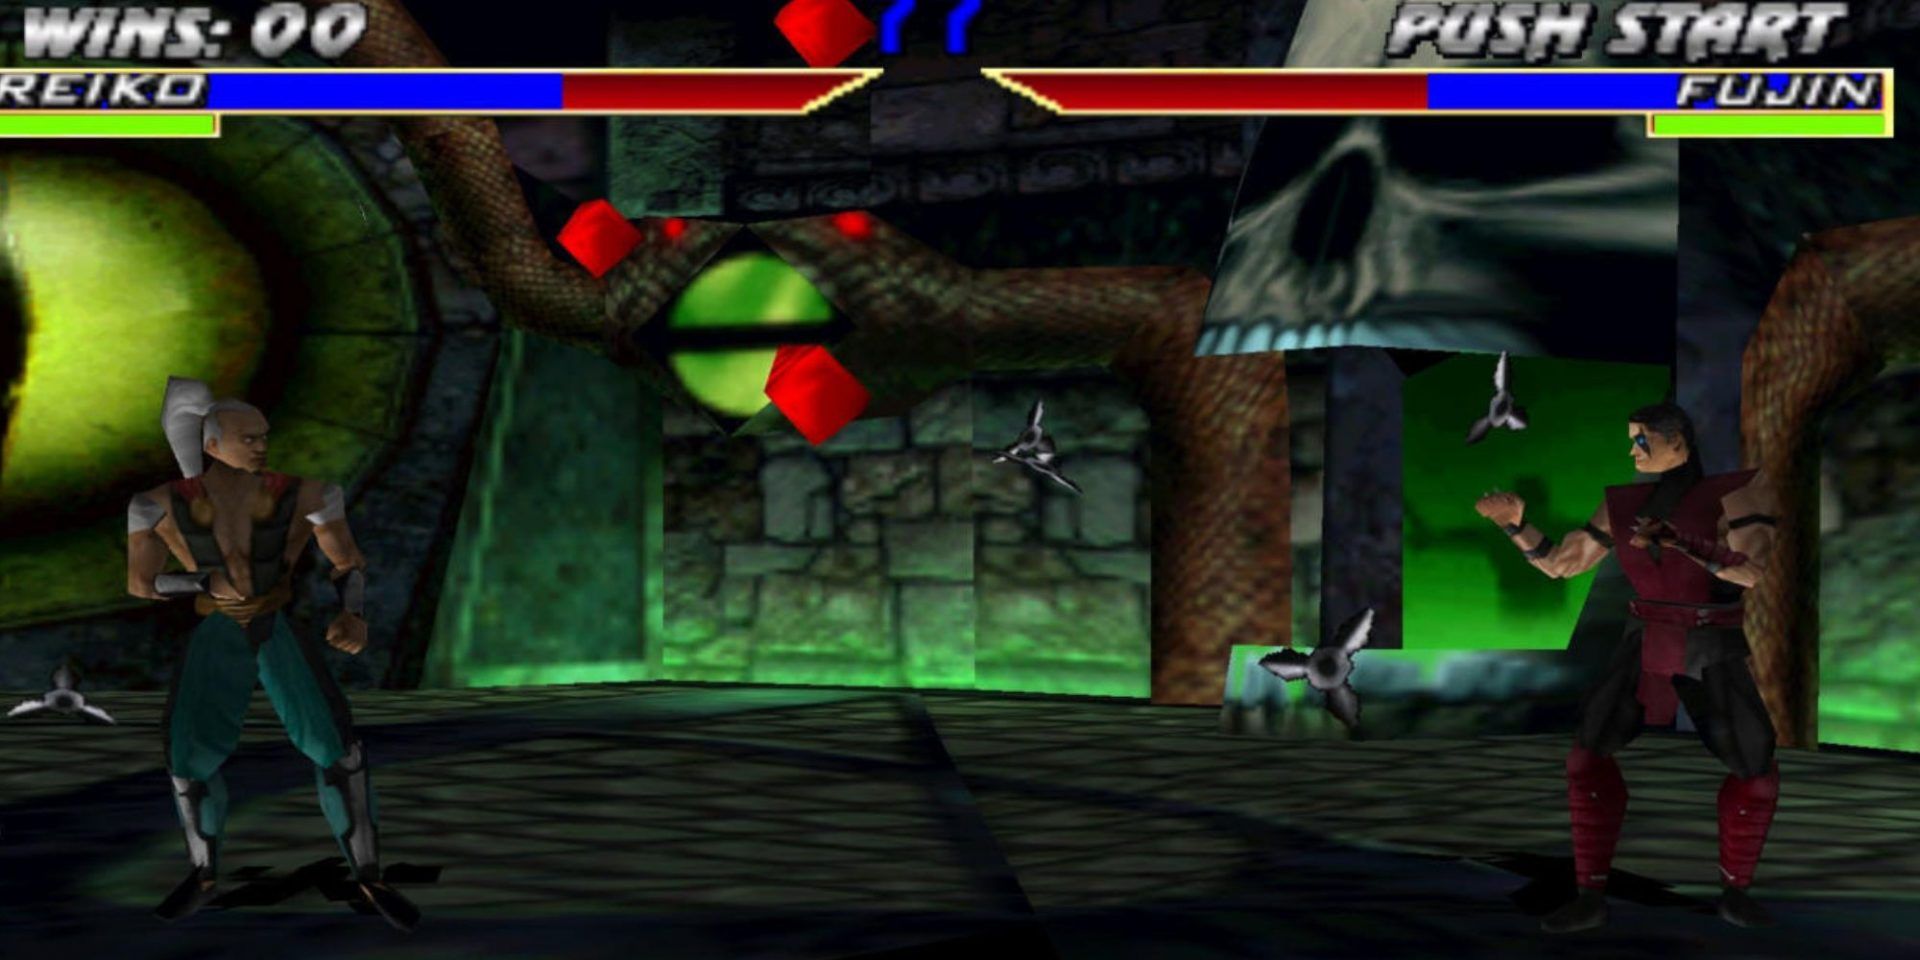 Reiko's shuriken's fly around Reptile's lair in his fight against Fujin